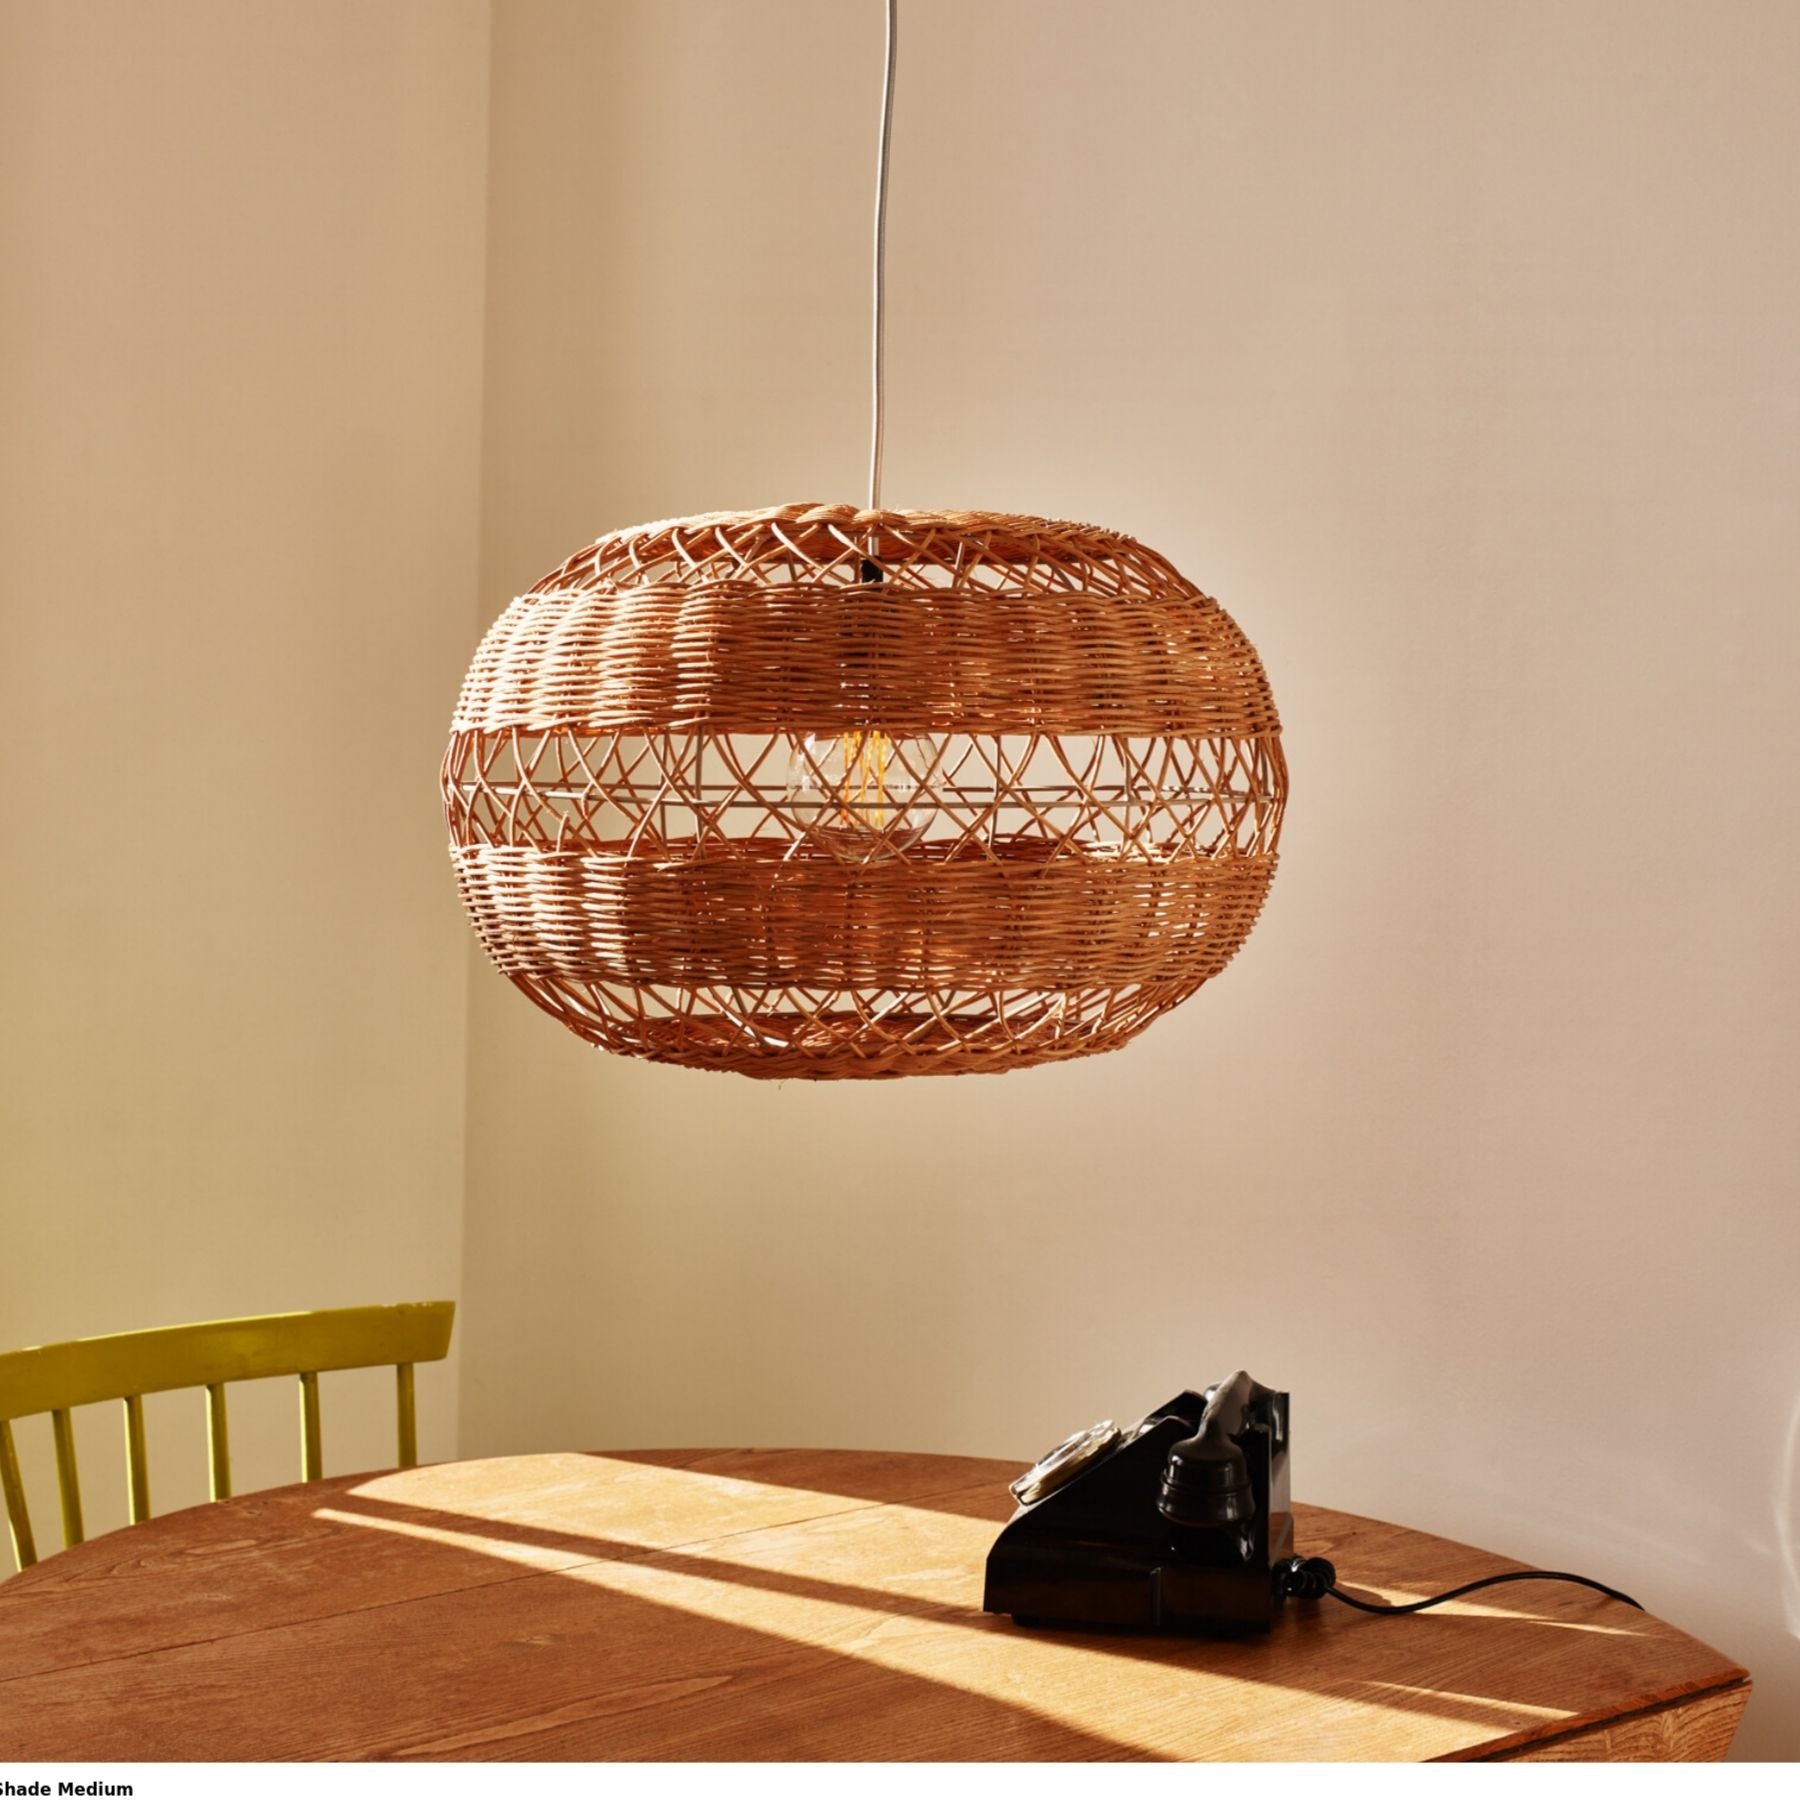 to protect rattan hanging lights from the potential harmful effects of sunlight they should be placed in a location with little exposure to sunlight